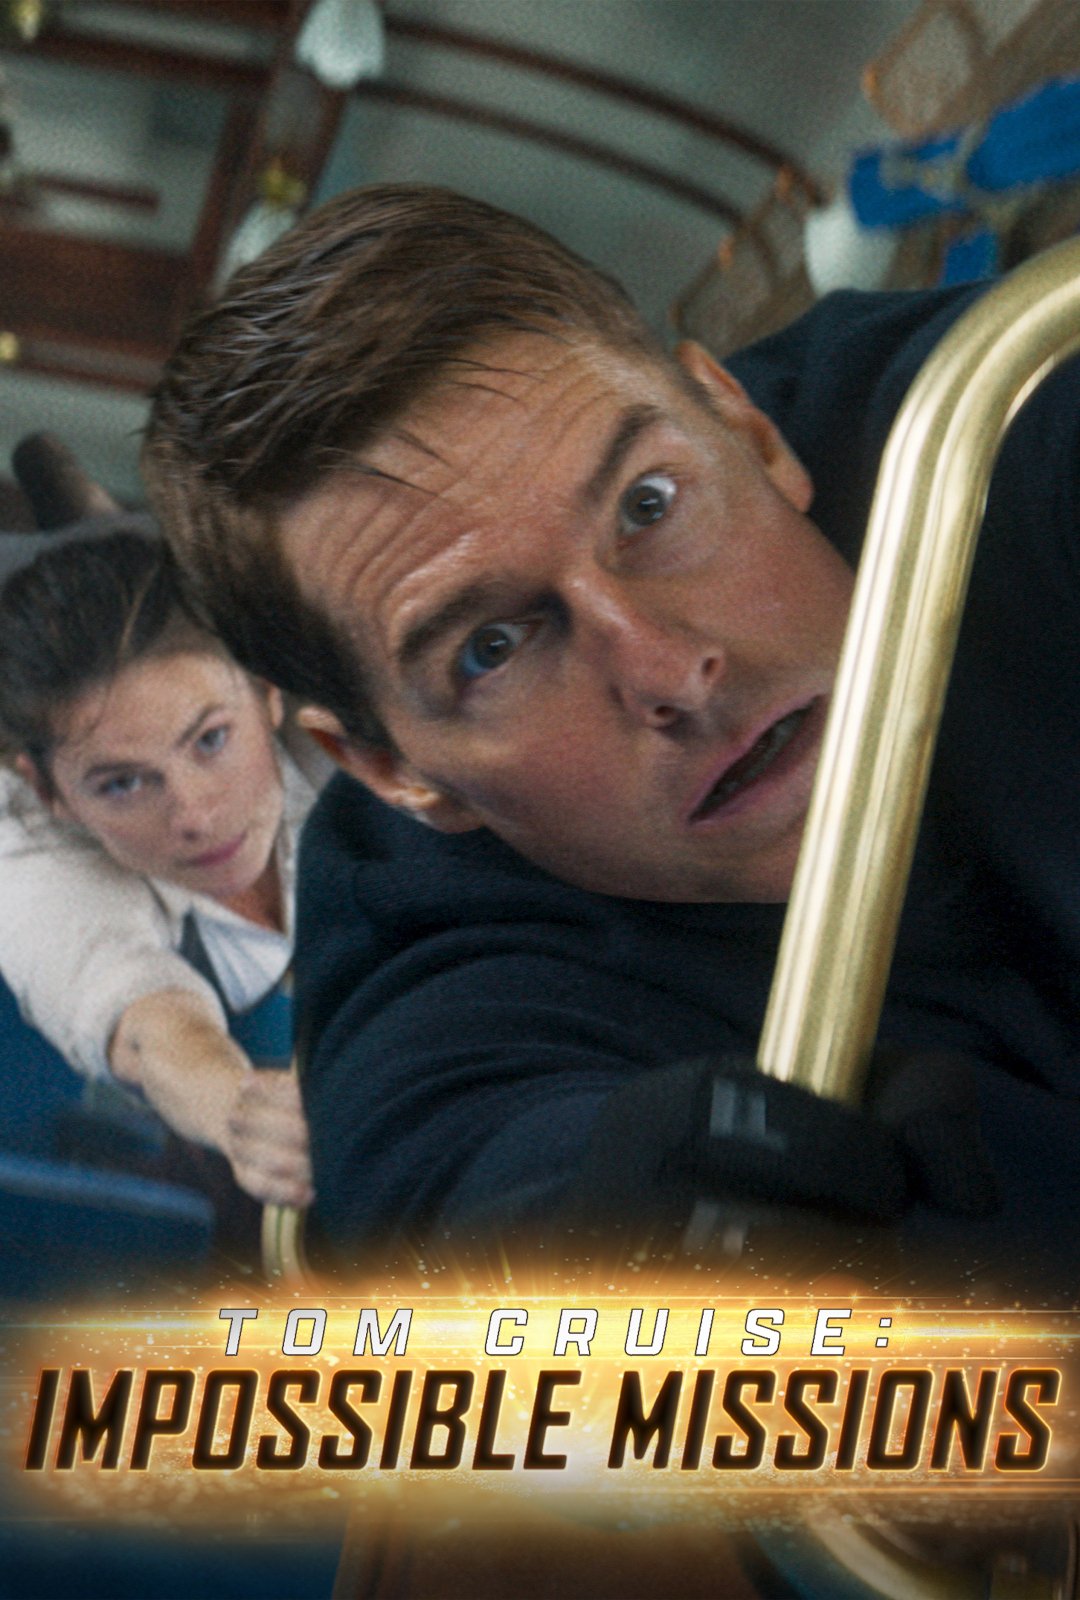 Tom Cruise: Impossible Missions